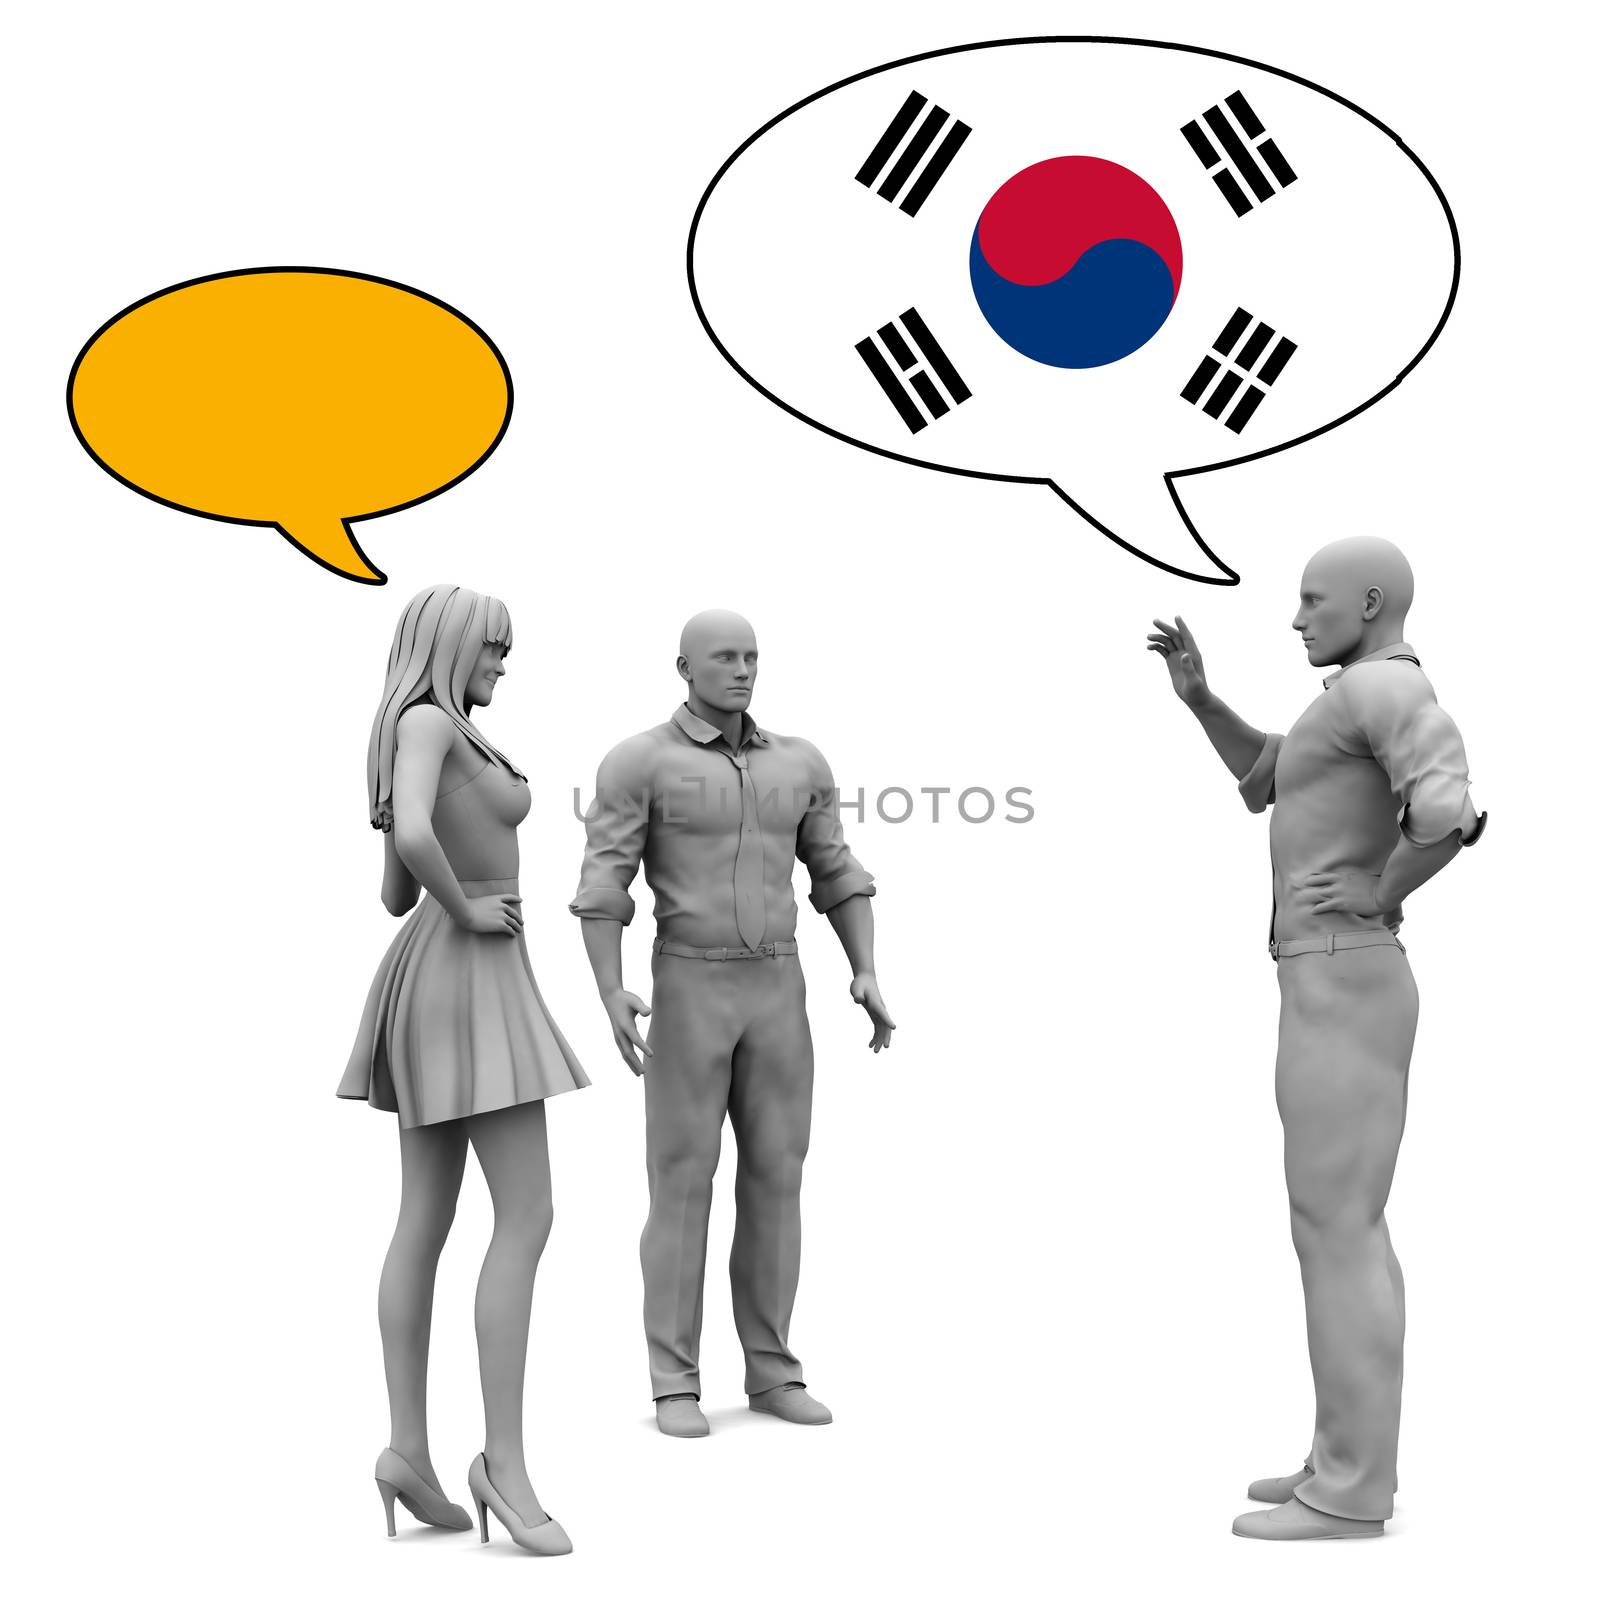 Learn Korean Culture and Language to Communicate